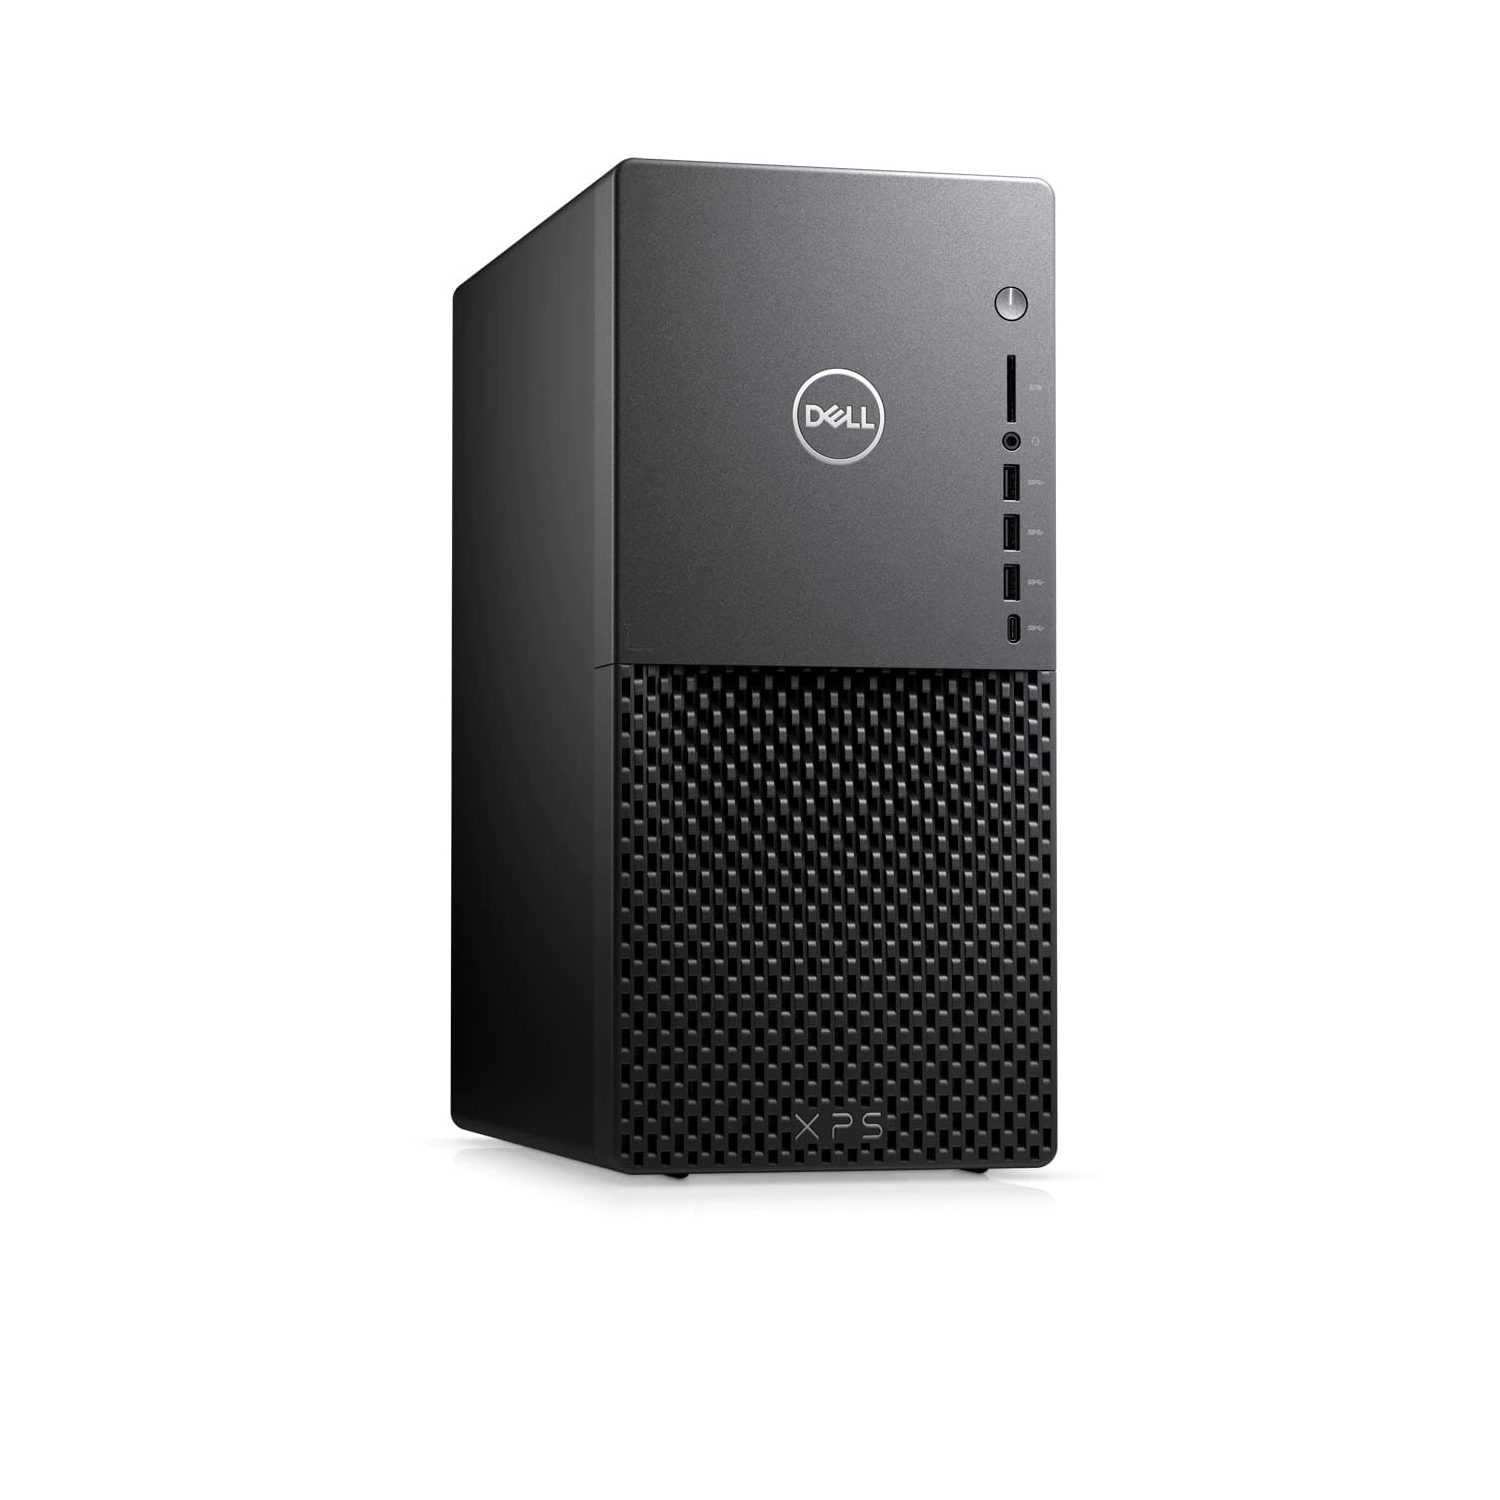 Refurbished (Excellent) - Dell XPS 8940 Desktop (2020) | Core i7 - 1TB HDD + 256GB SSD - 16GB RAM - 2060 SUPER | 8 Cores @ 4.8 GHz - 10th Gen CPU Certified Refurbished